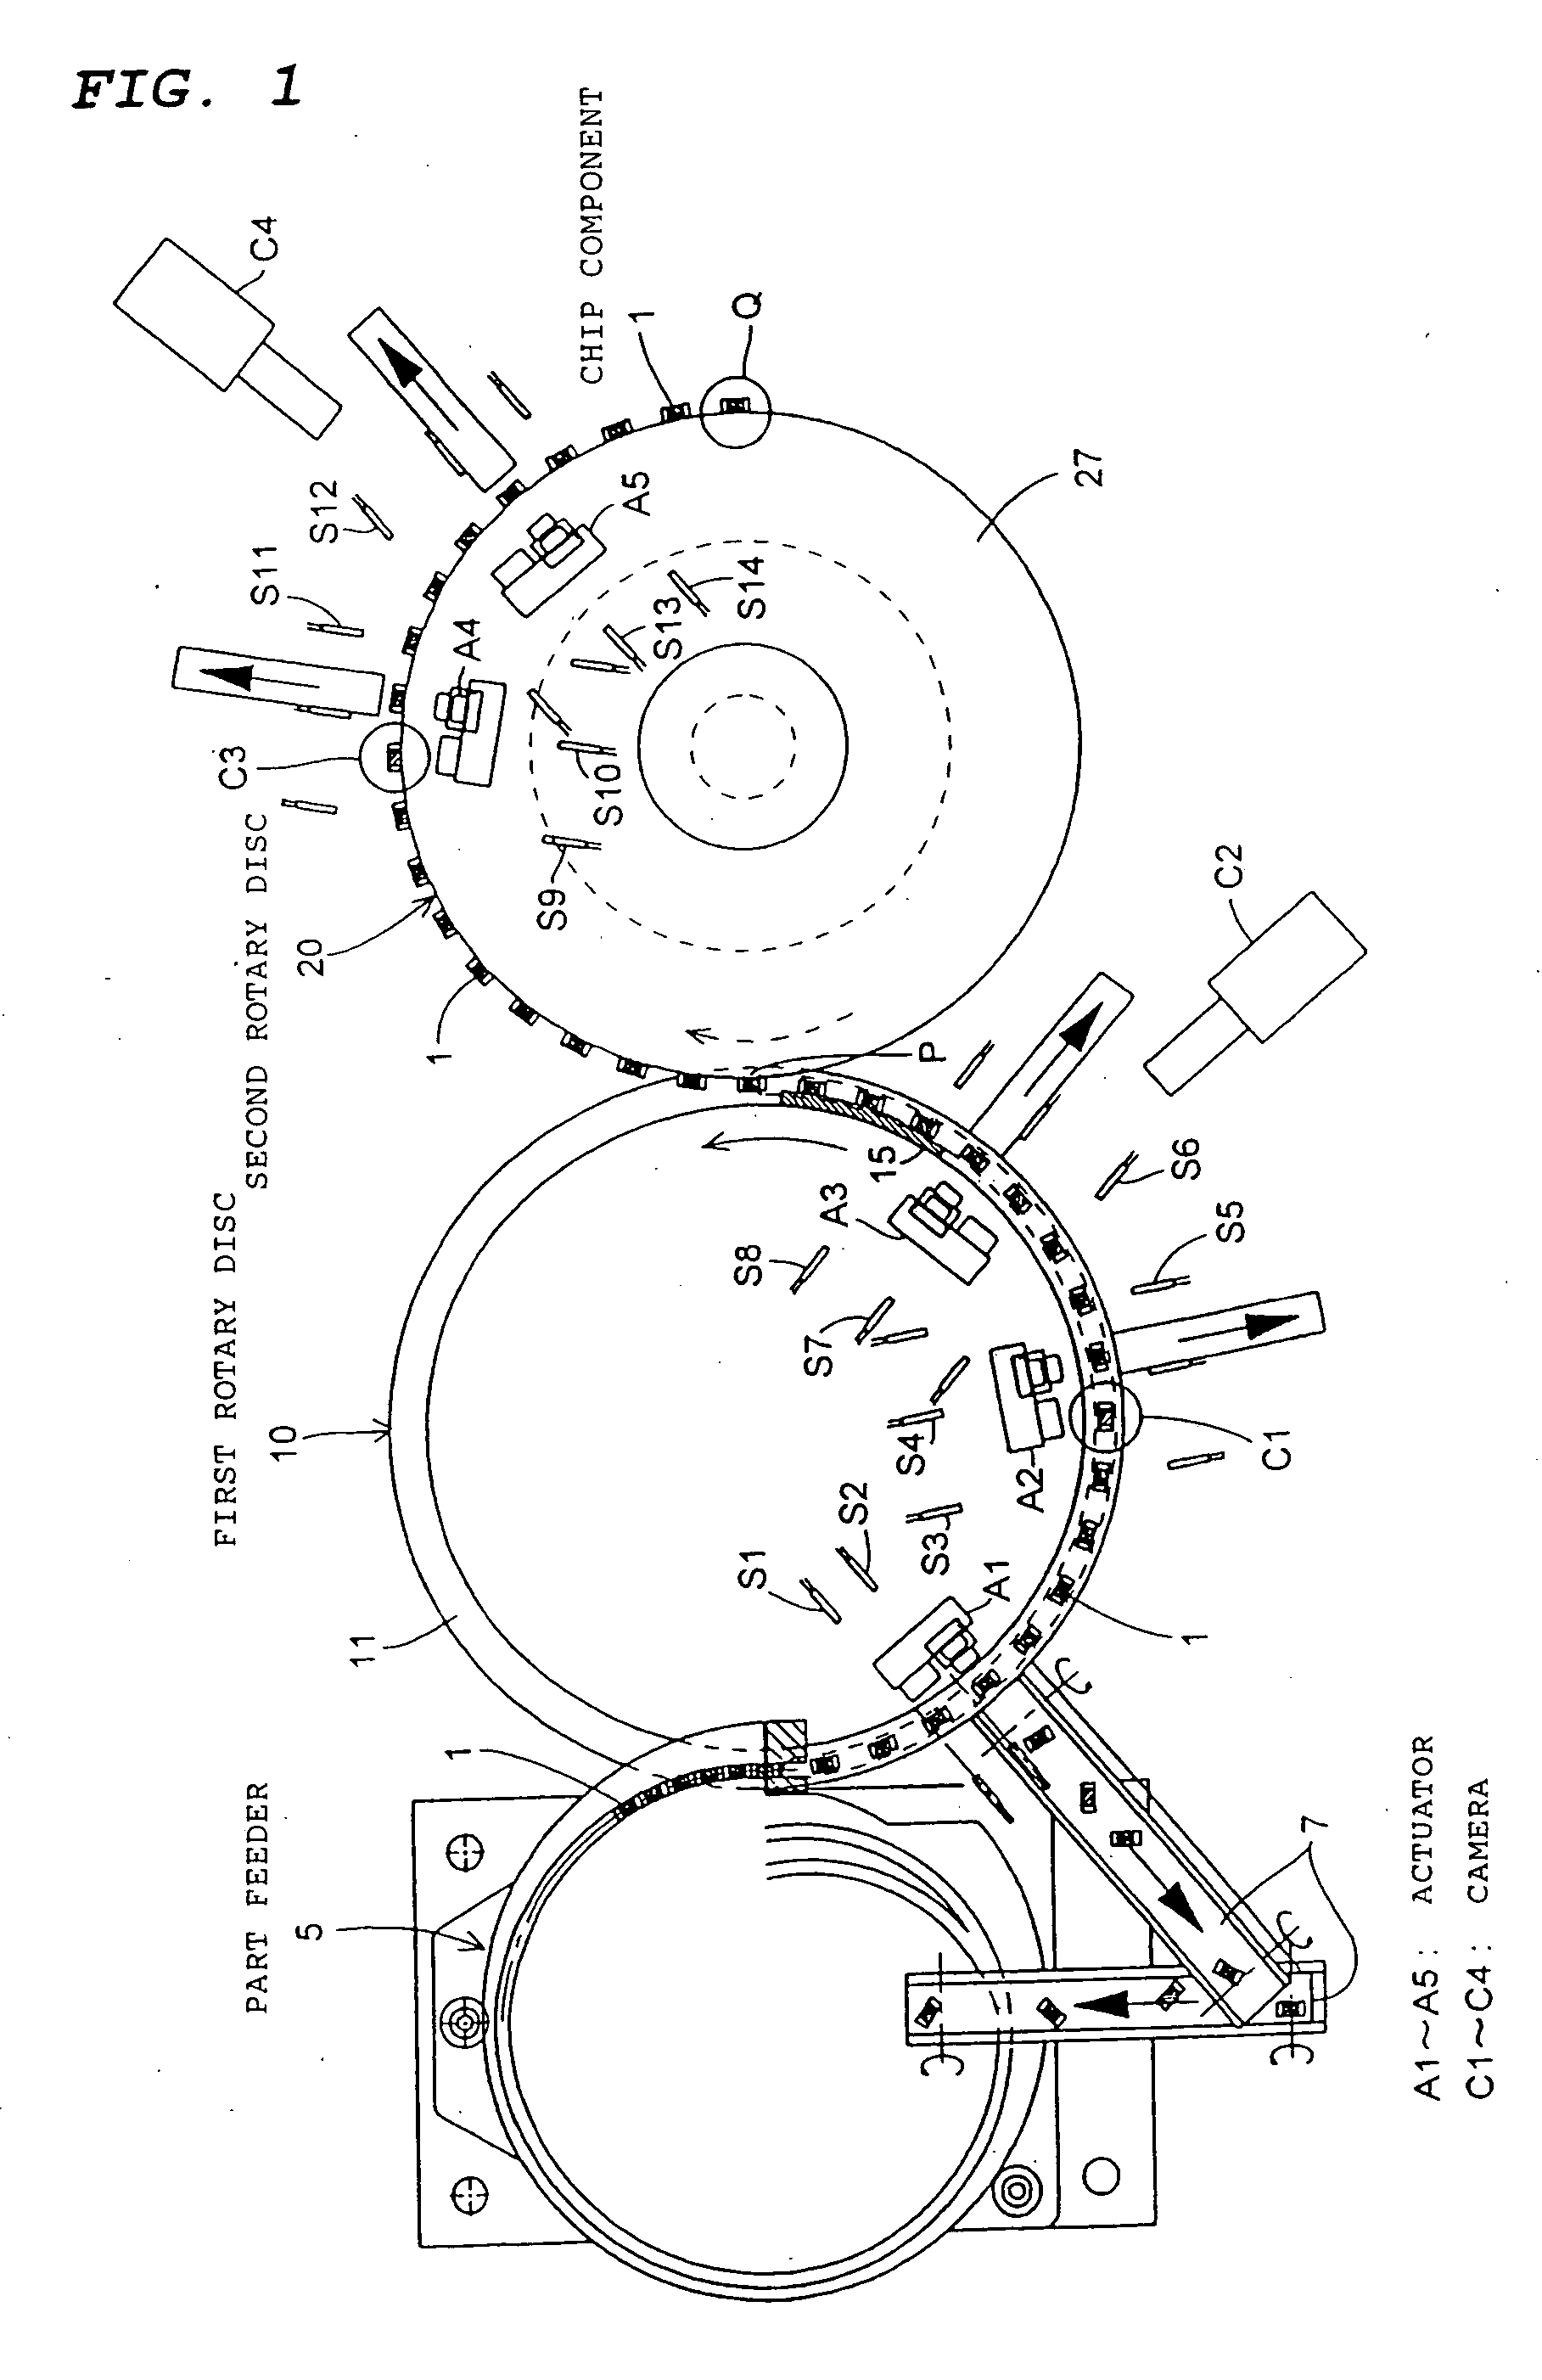 Chip Component Carrying Method and System, and Visual Inspection Method and System